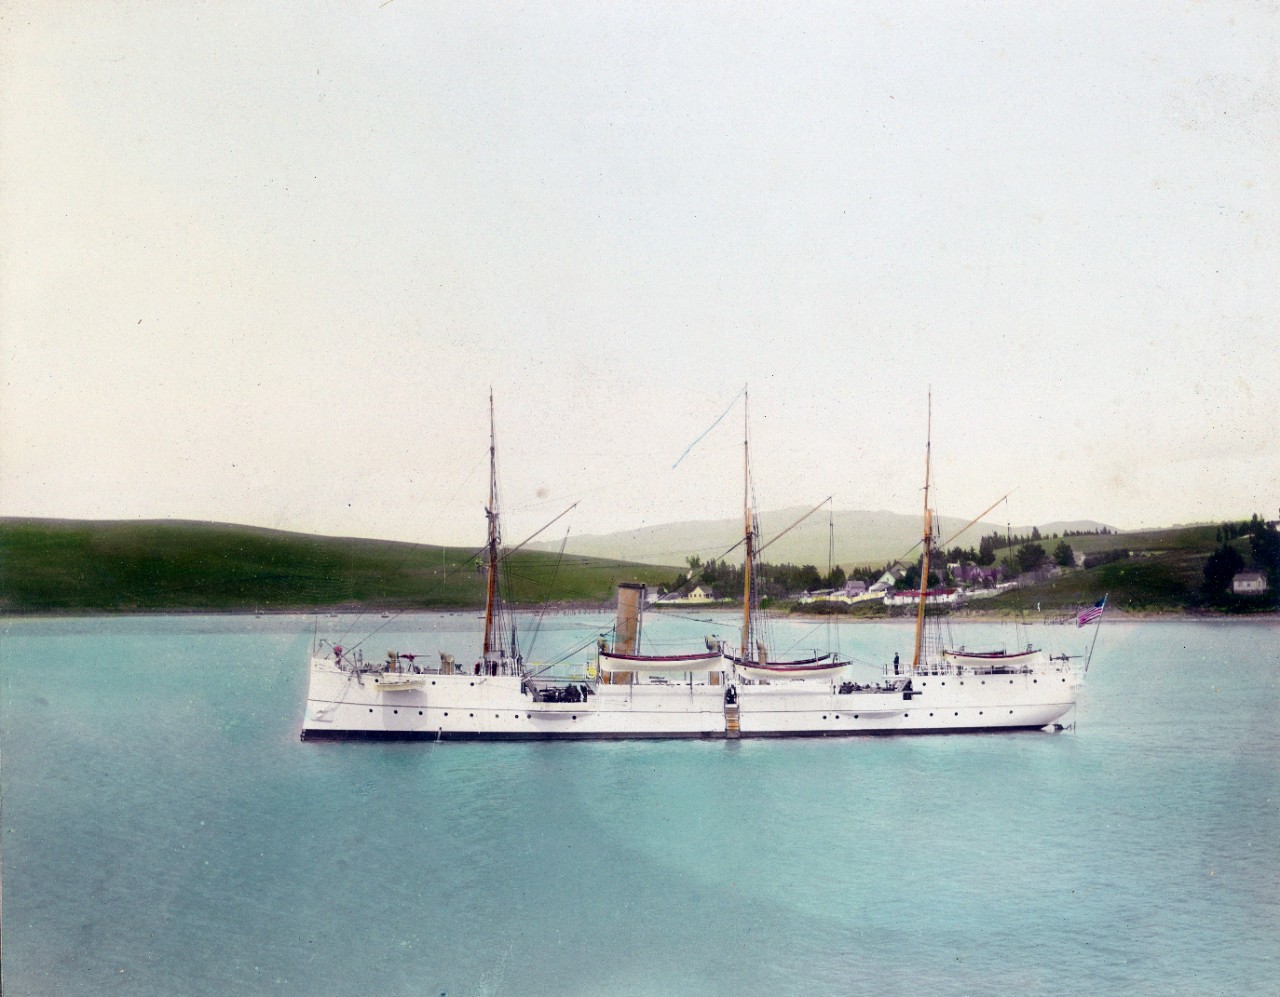 2 photo albums plus 45 loose photographs from the U.S. Navy service of Nathan Sargent. Shown are USS Baltimore (C-3) cruise in 1905 on Asiatic Station with Sargent as commanding officer. Expedition to Panama and Columbia in 1900. China and Russia in the late 1890’s including USS Petrel (PG-2) and other U.S. Navy warships. Some photos filed in NHF Oversize. Many photos have been assigned NH numbers or removed to the NH collection.